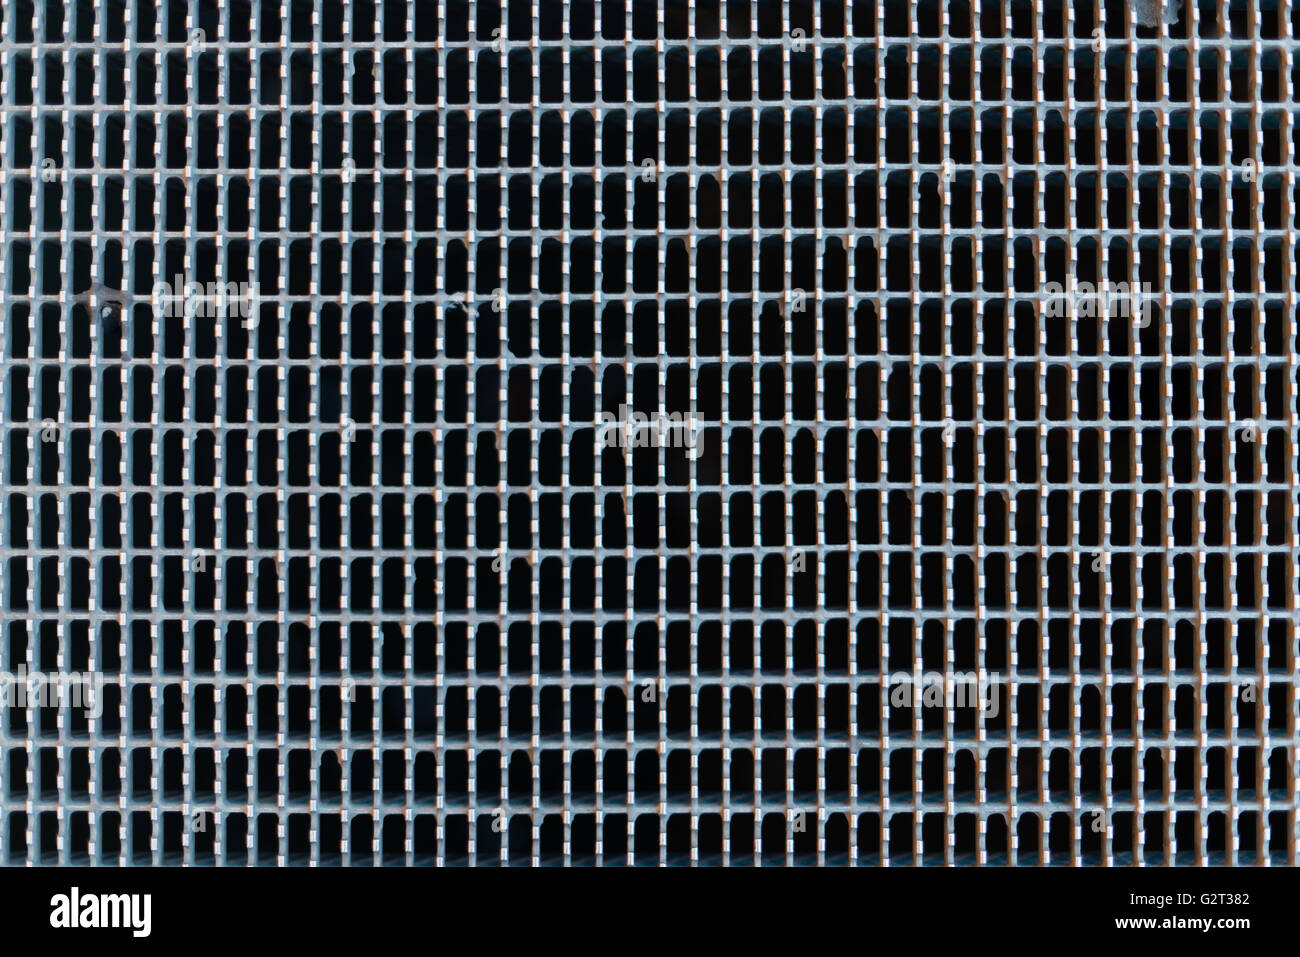 Iron grid with rectangular pattern symbolizing a wall, border or fence containing repetitive patterns resulting from industrial Stock Photo